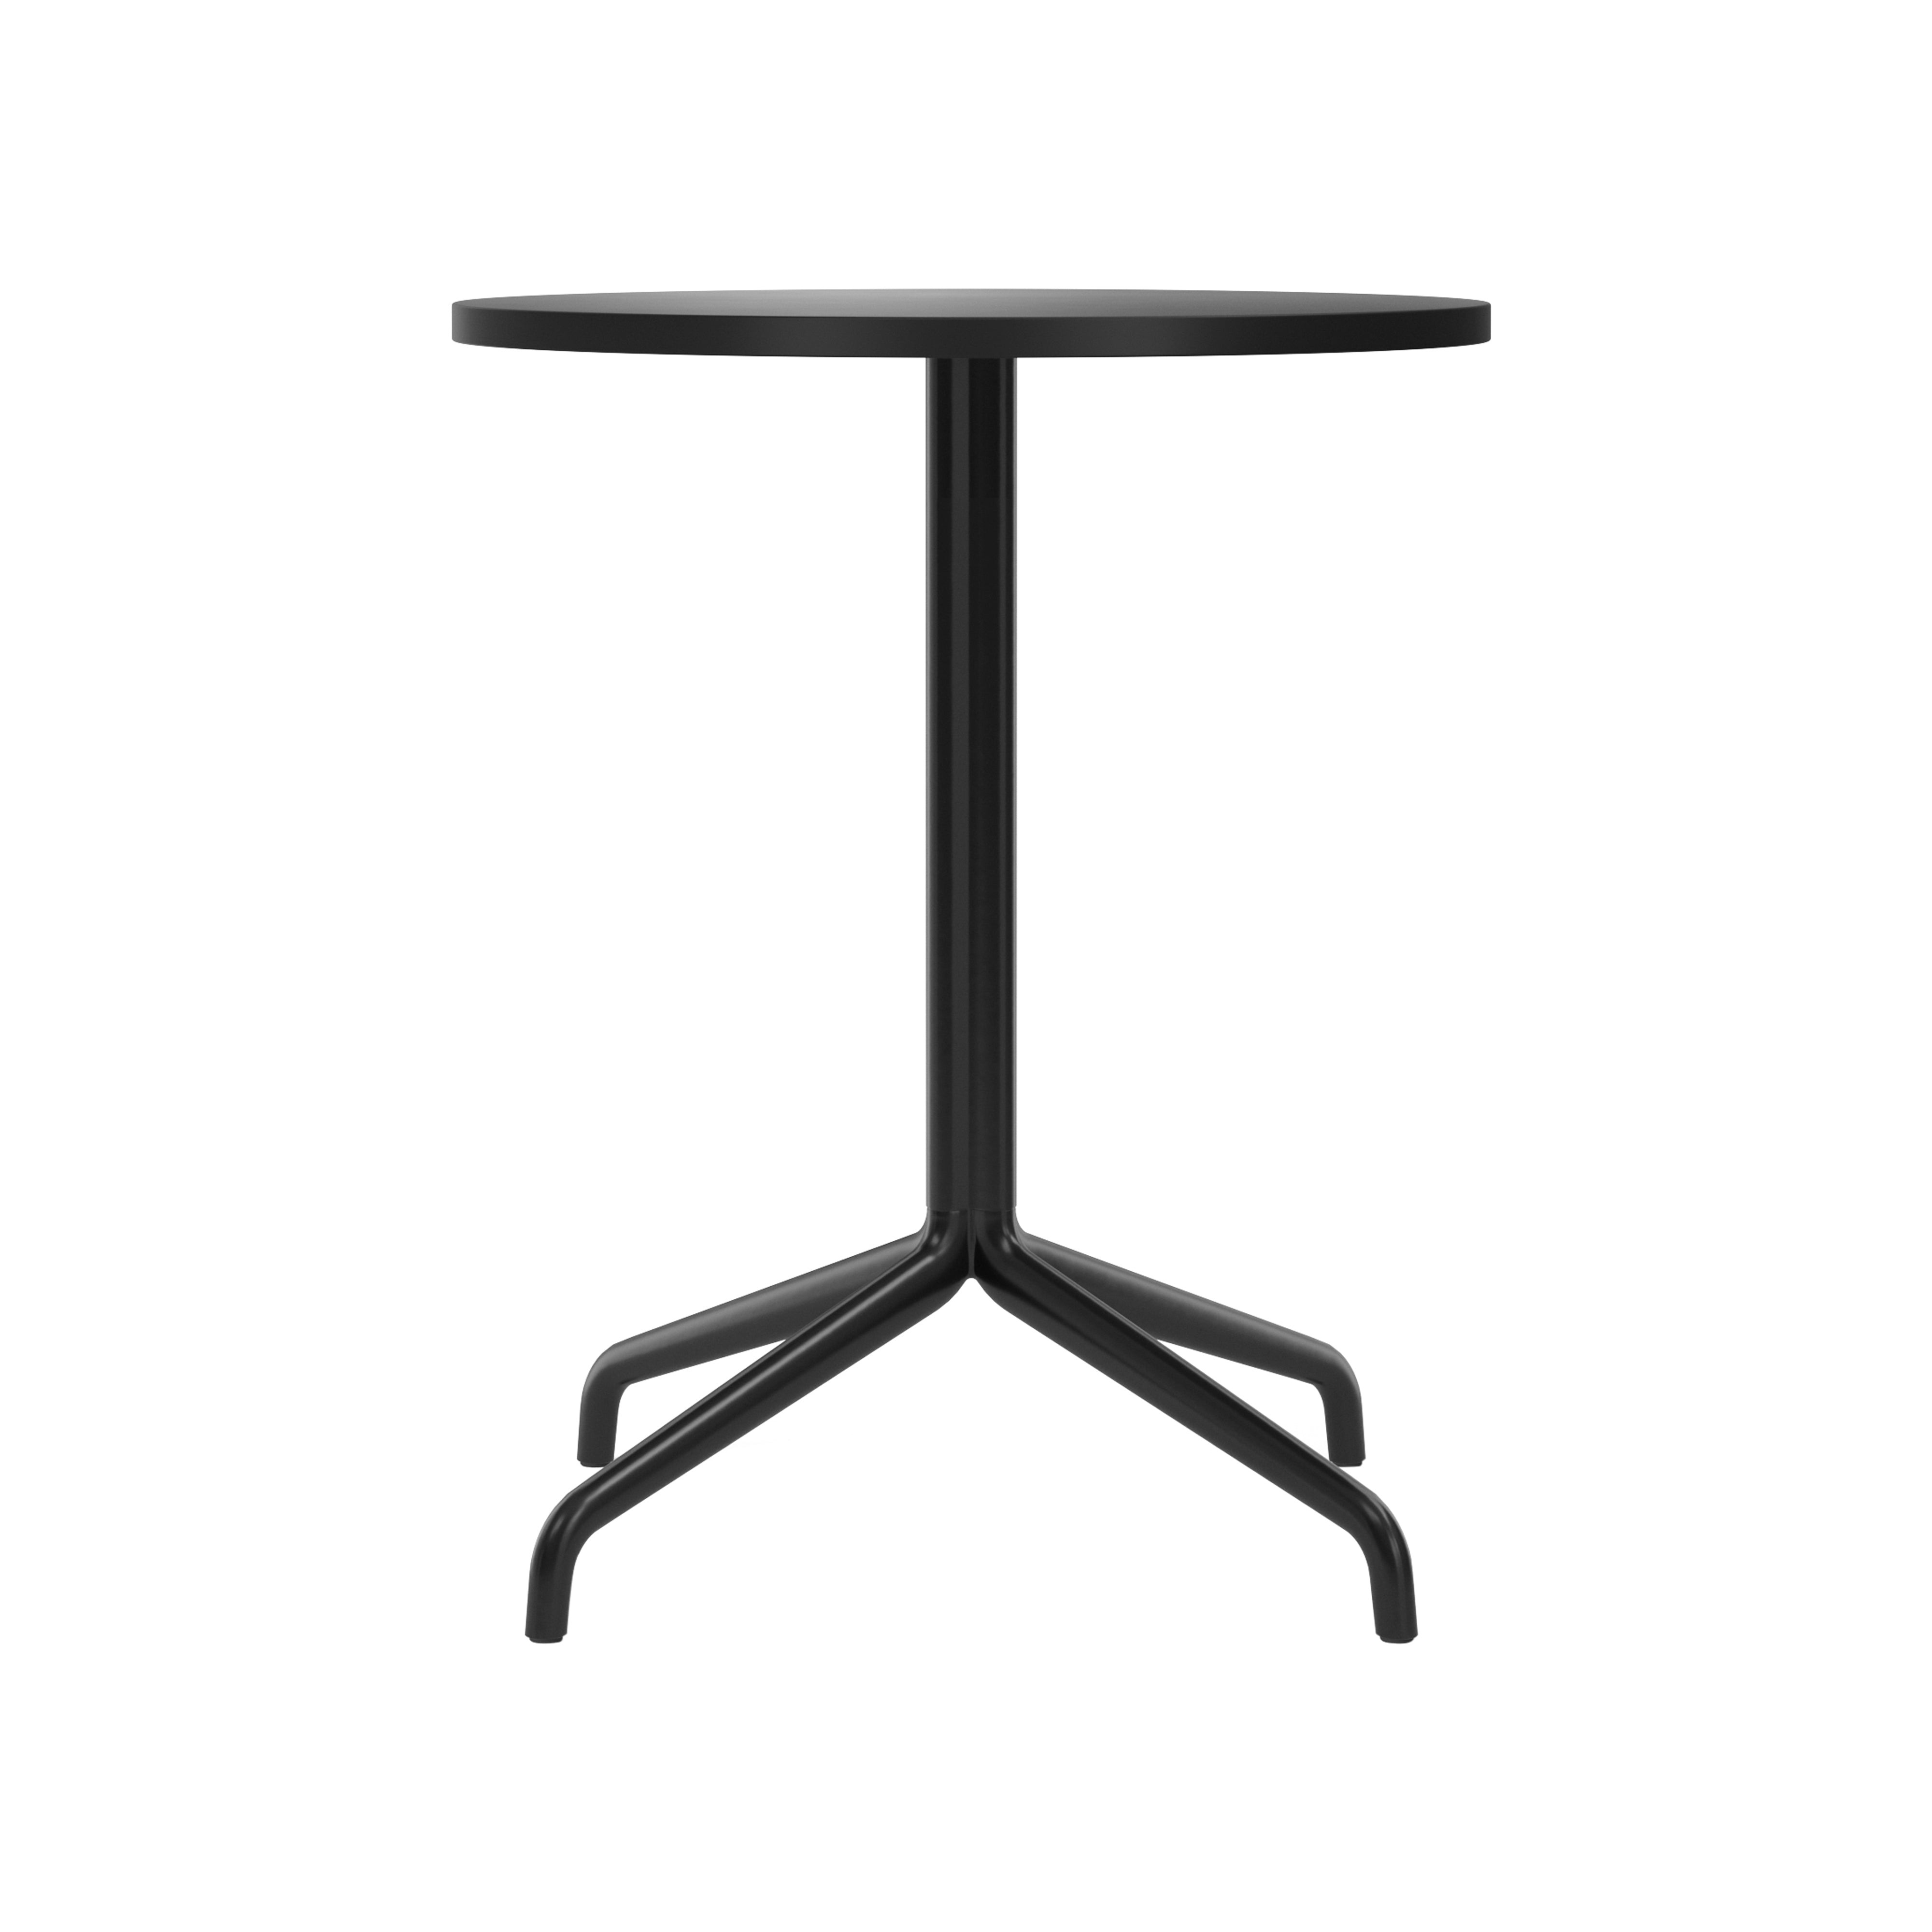 Harbour Column Round Dining Table: Small - 23.6